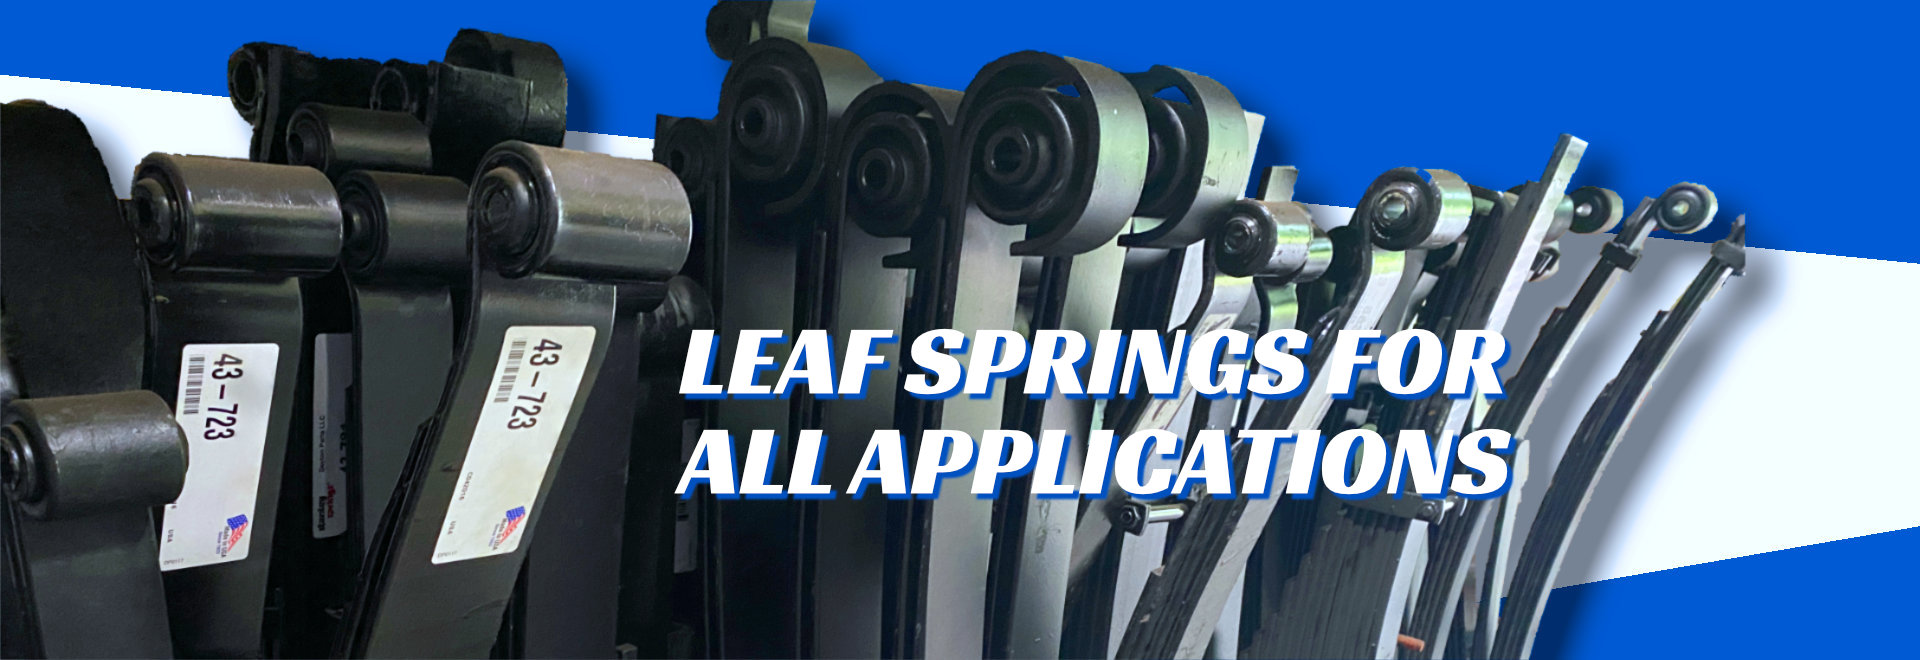 Leaf Springs for All Applications